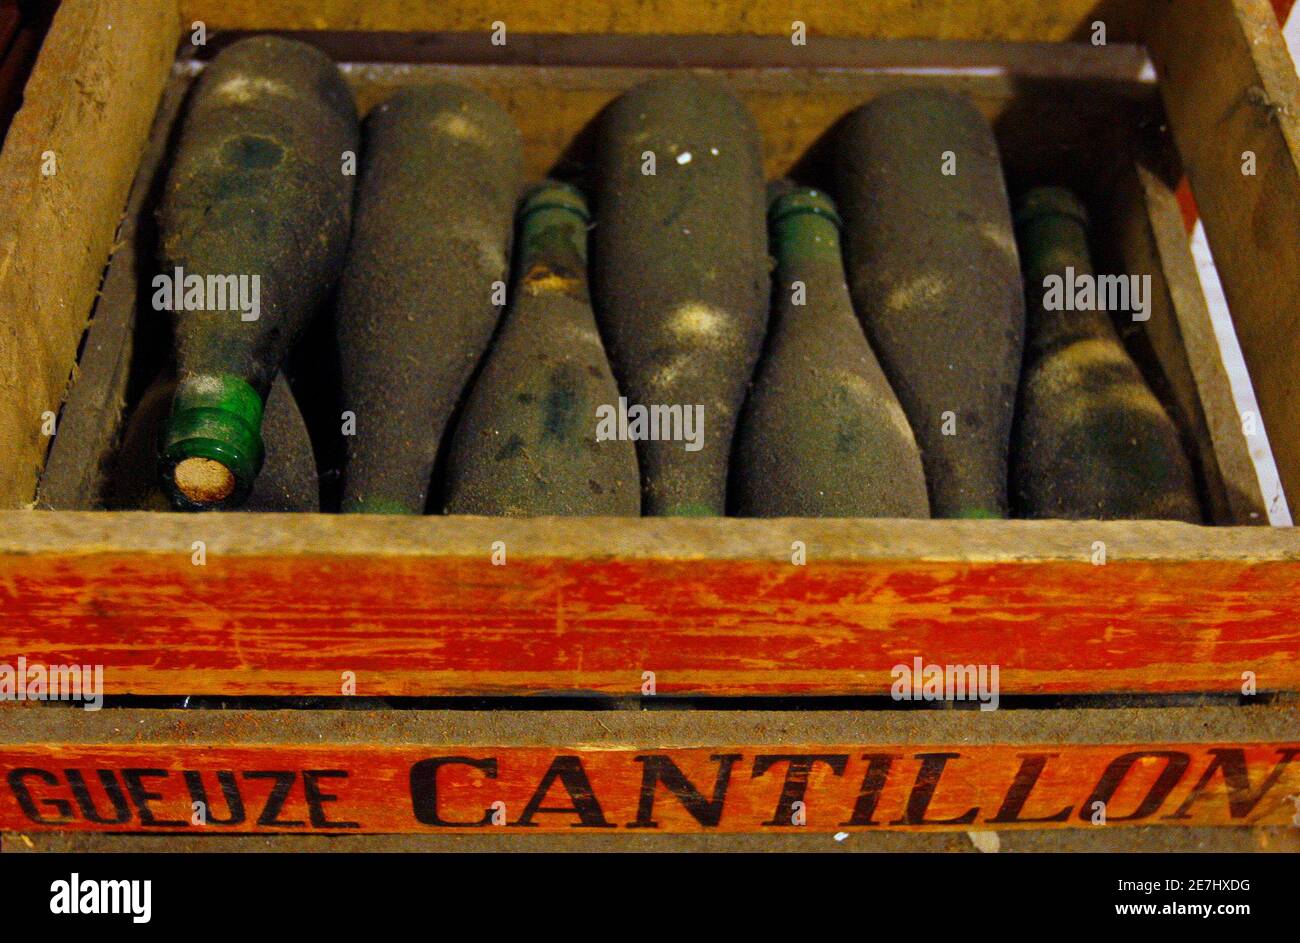 Old bottles of beer are kept in a cellar at a traditional Cantillon brewery in Brussels November 3, 2009. Lambic beer risked dying out a decade ago, but its future is now assured despite being among the most awkward beers to make, store and market. Picture taken November 3, 2009.        To match Reuters Life! BELGIUM-BEER/       REUTERS/Yves Herman (BELGIUM BUSINESS) Stock Photo